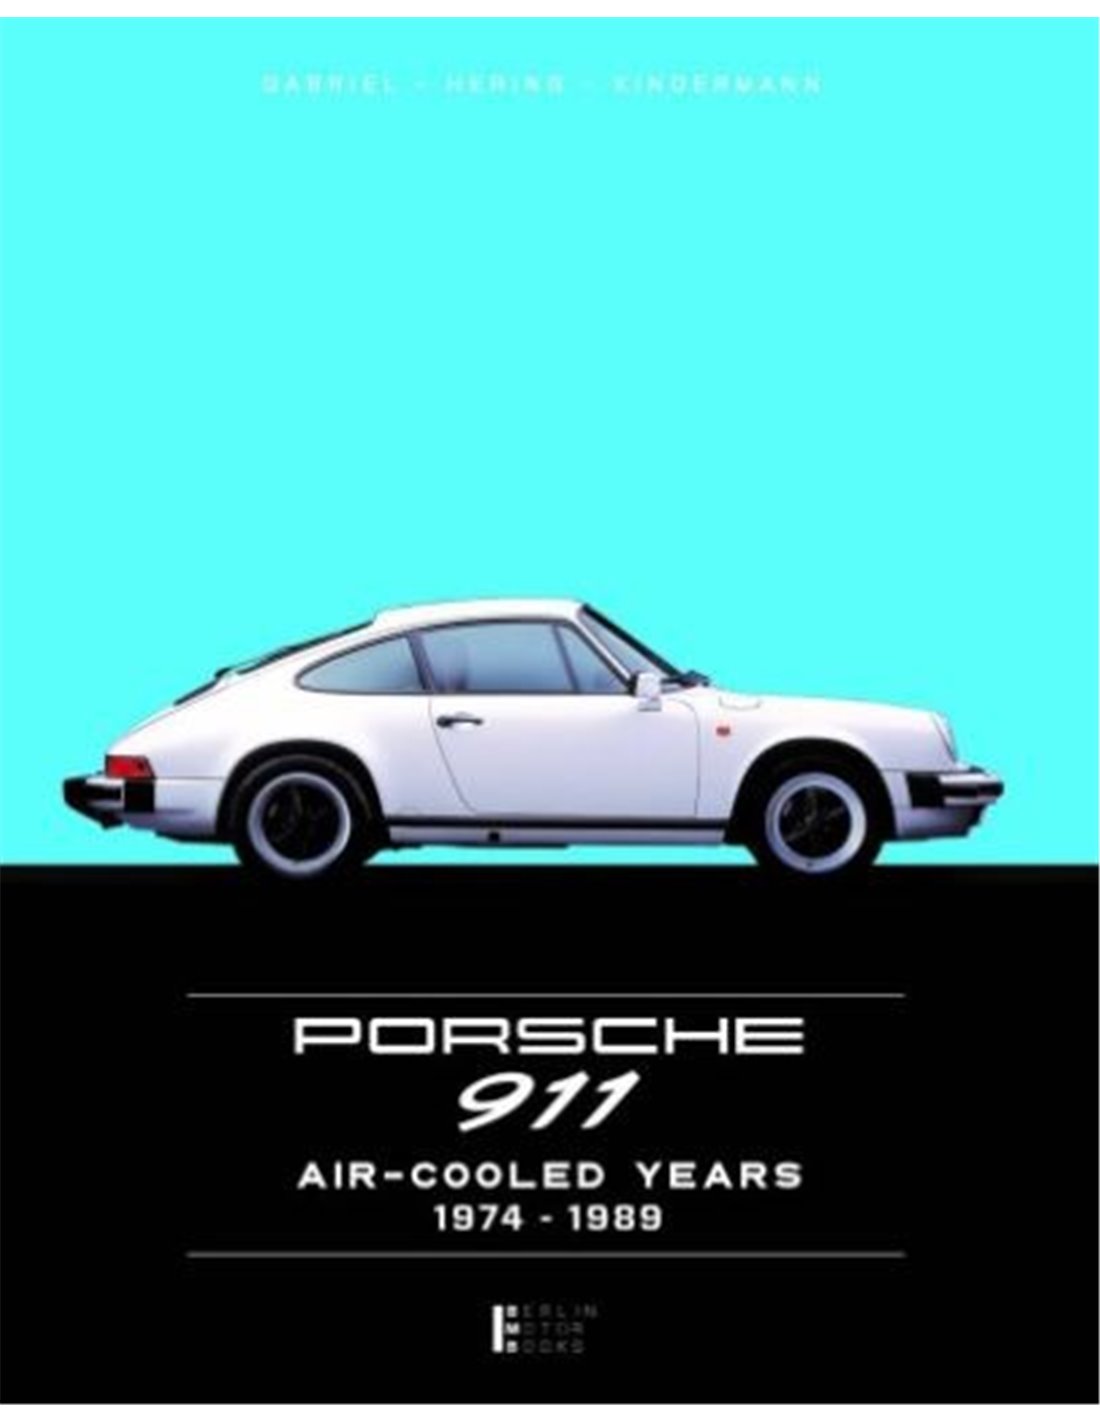 PORSCHE 911 - AIR COOLED YEARS 1974-1989 - BOOK \LIMITED EDITION\